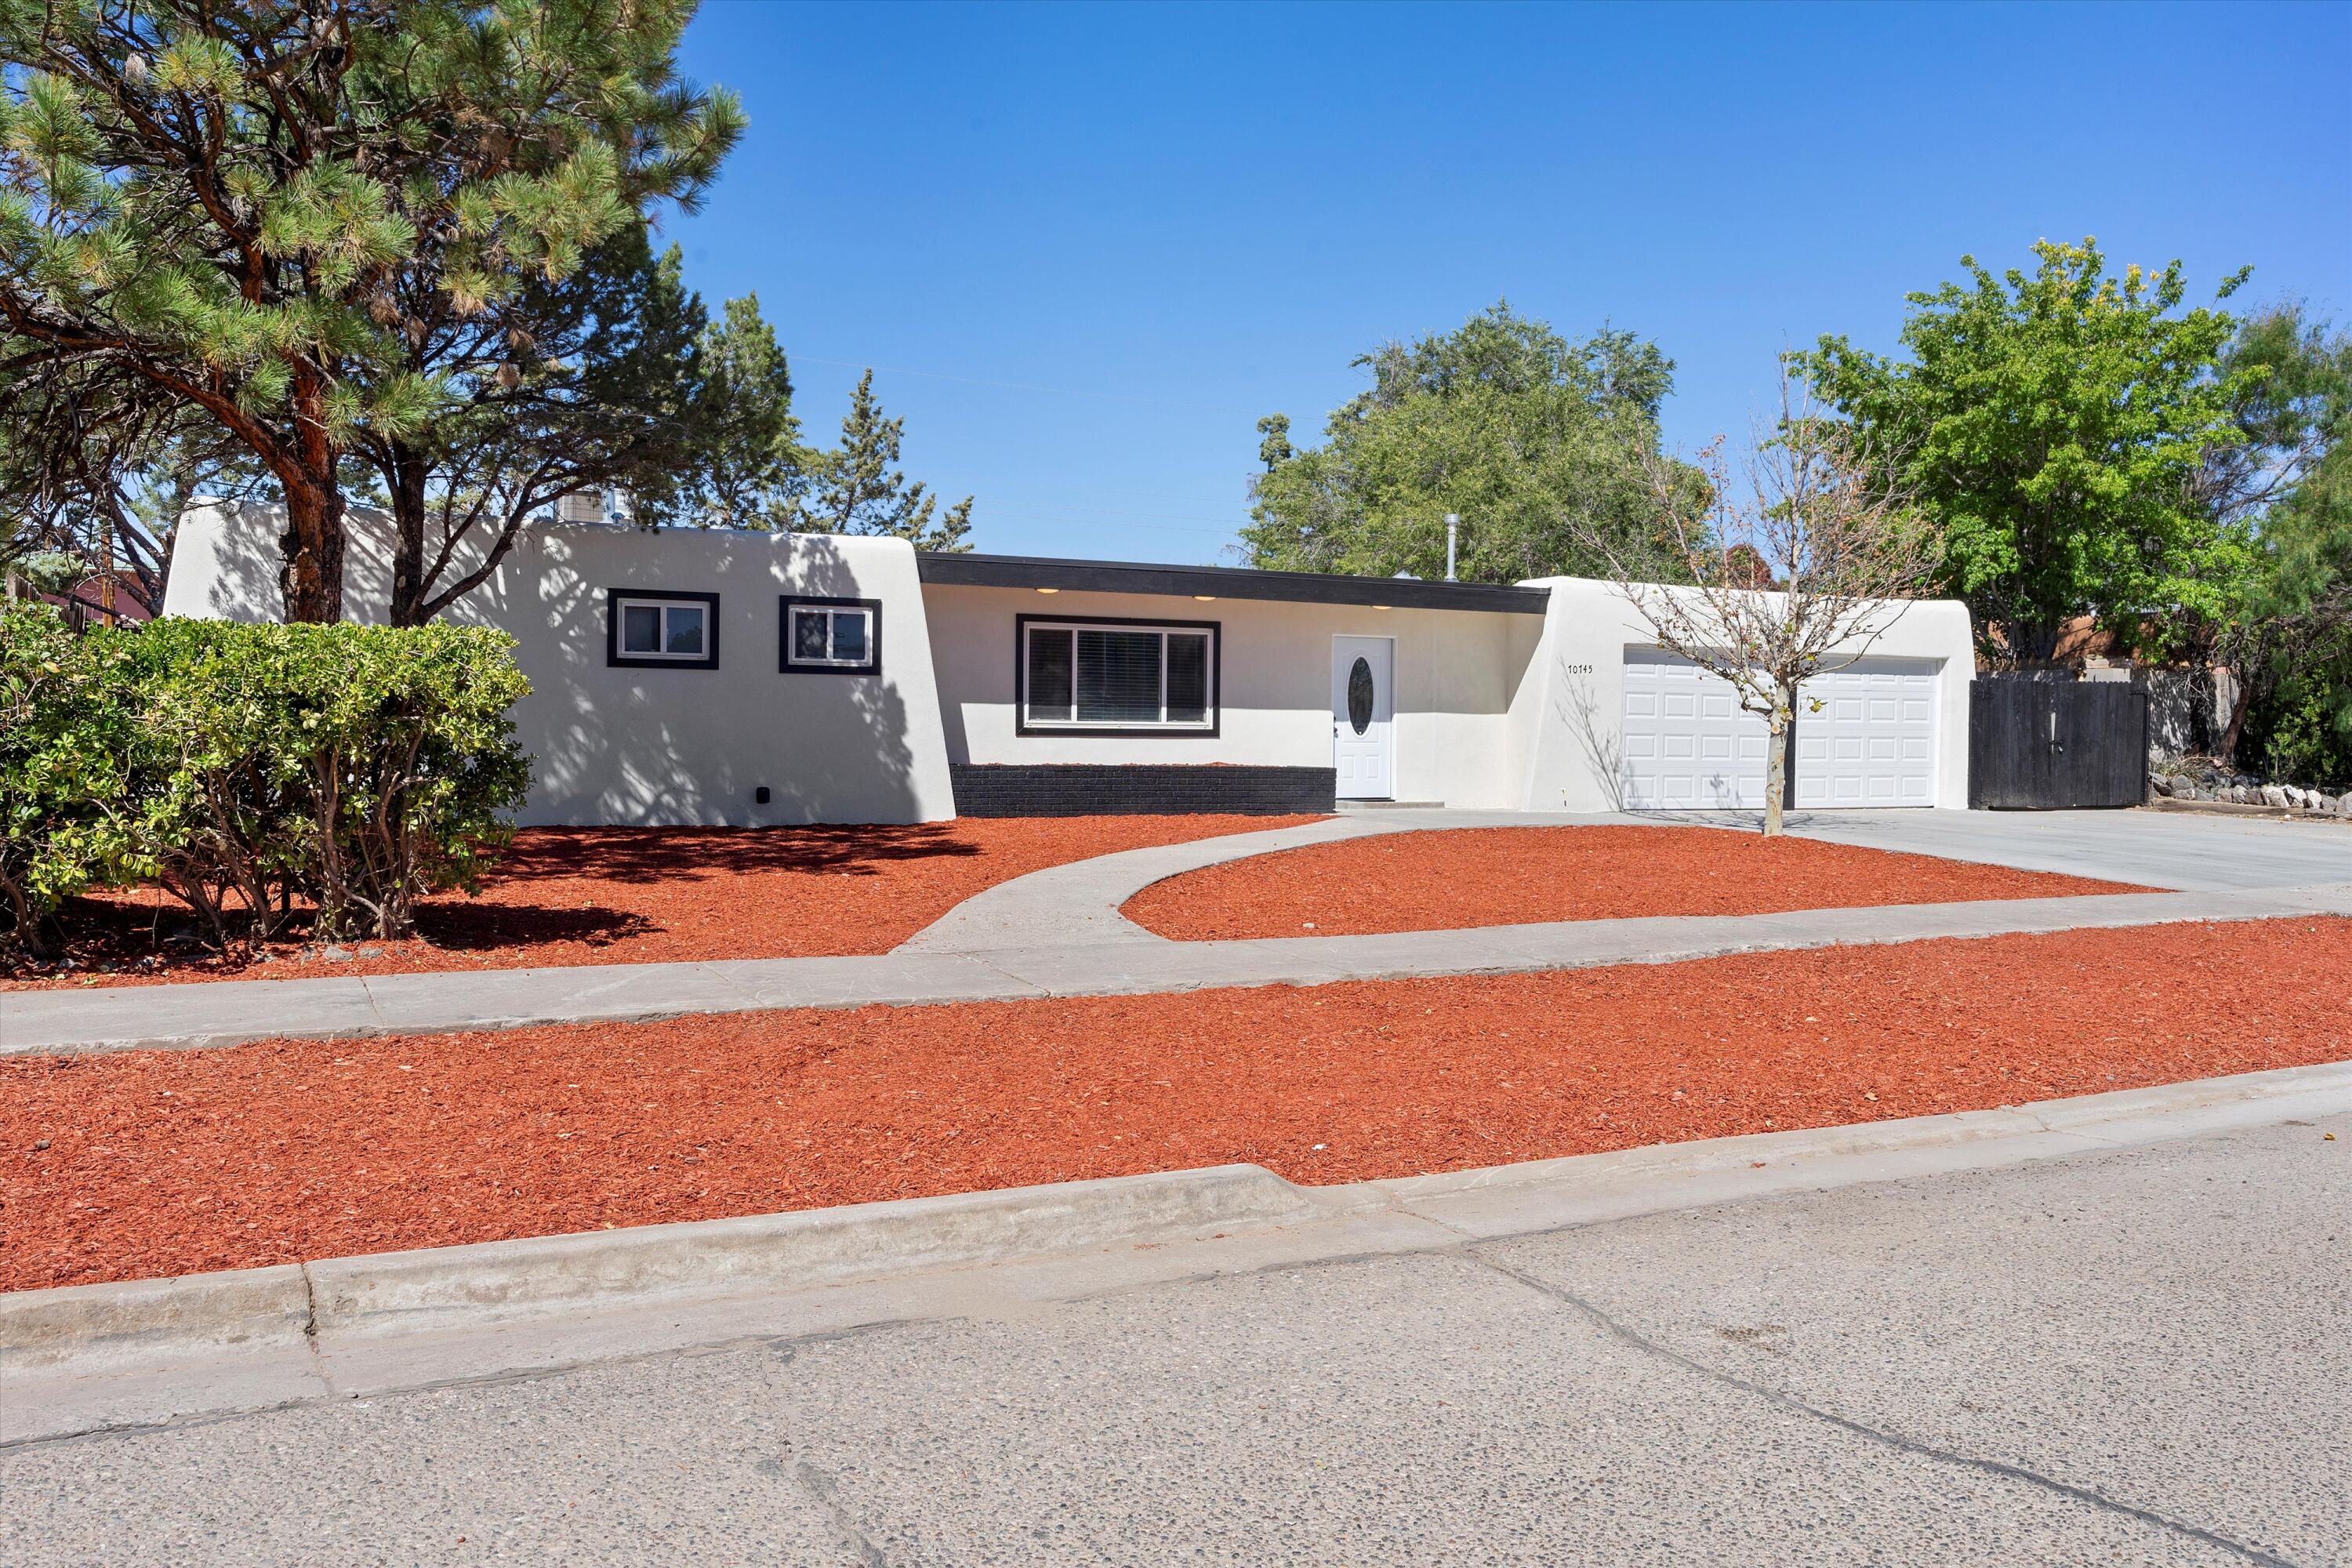 10145 Alder Drive NW, Albuquerque, New Mexico 87114, 4 Bedrooms Bedrooms, ,3 BathroomsBathrooms,Residential,For Sale,10145 Alder Drive NW,1043048